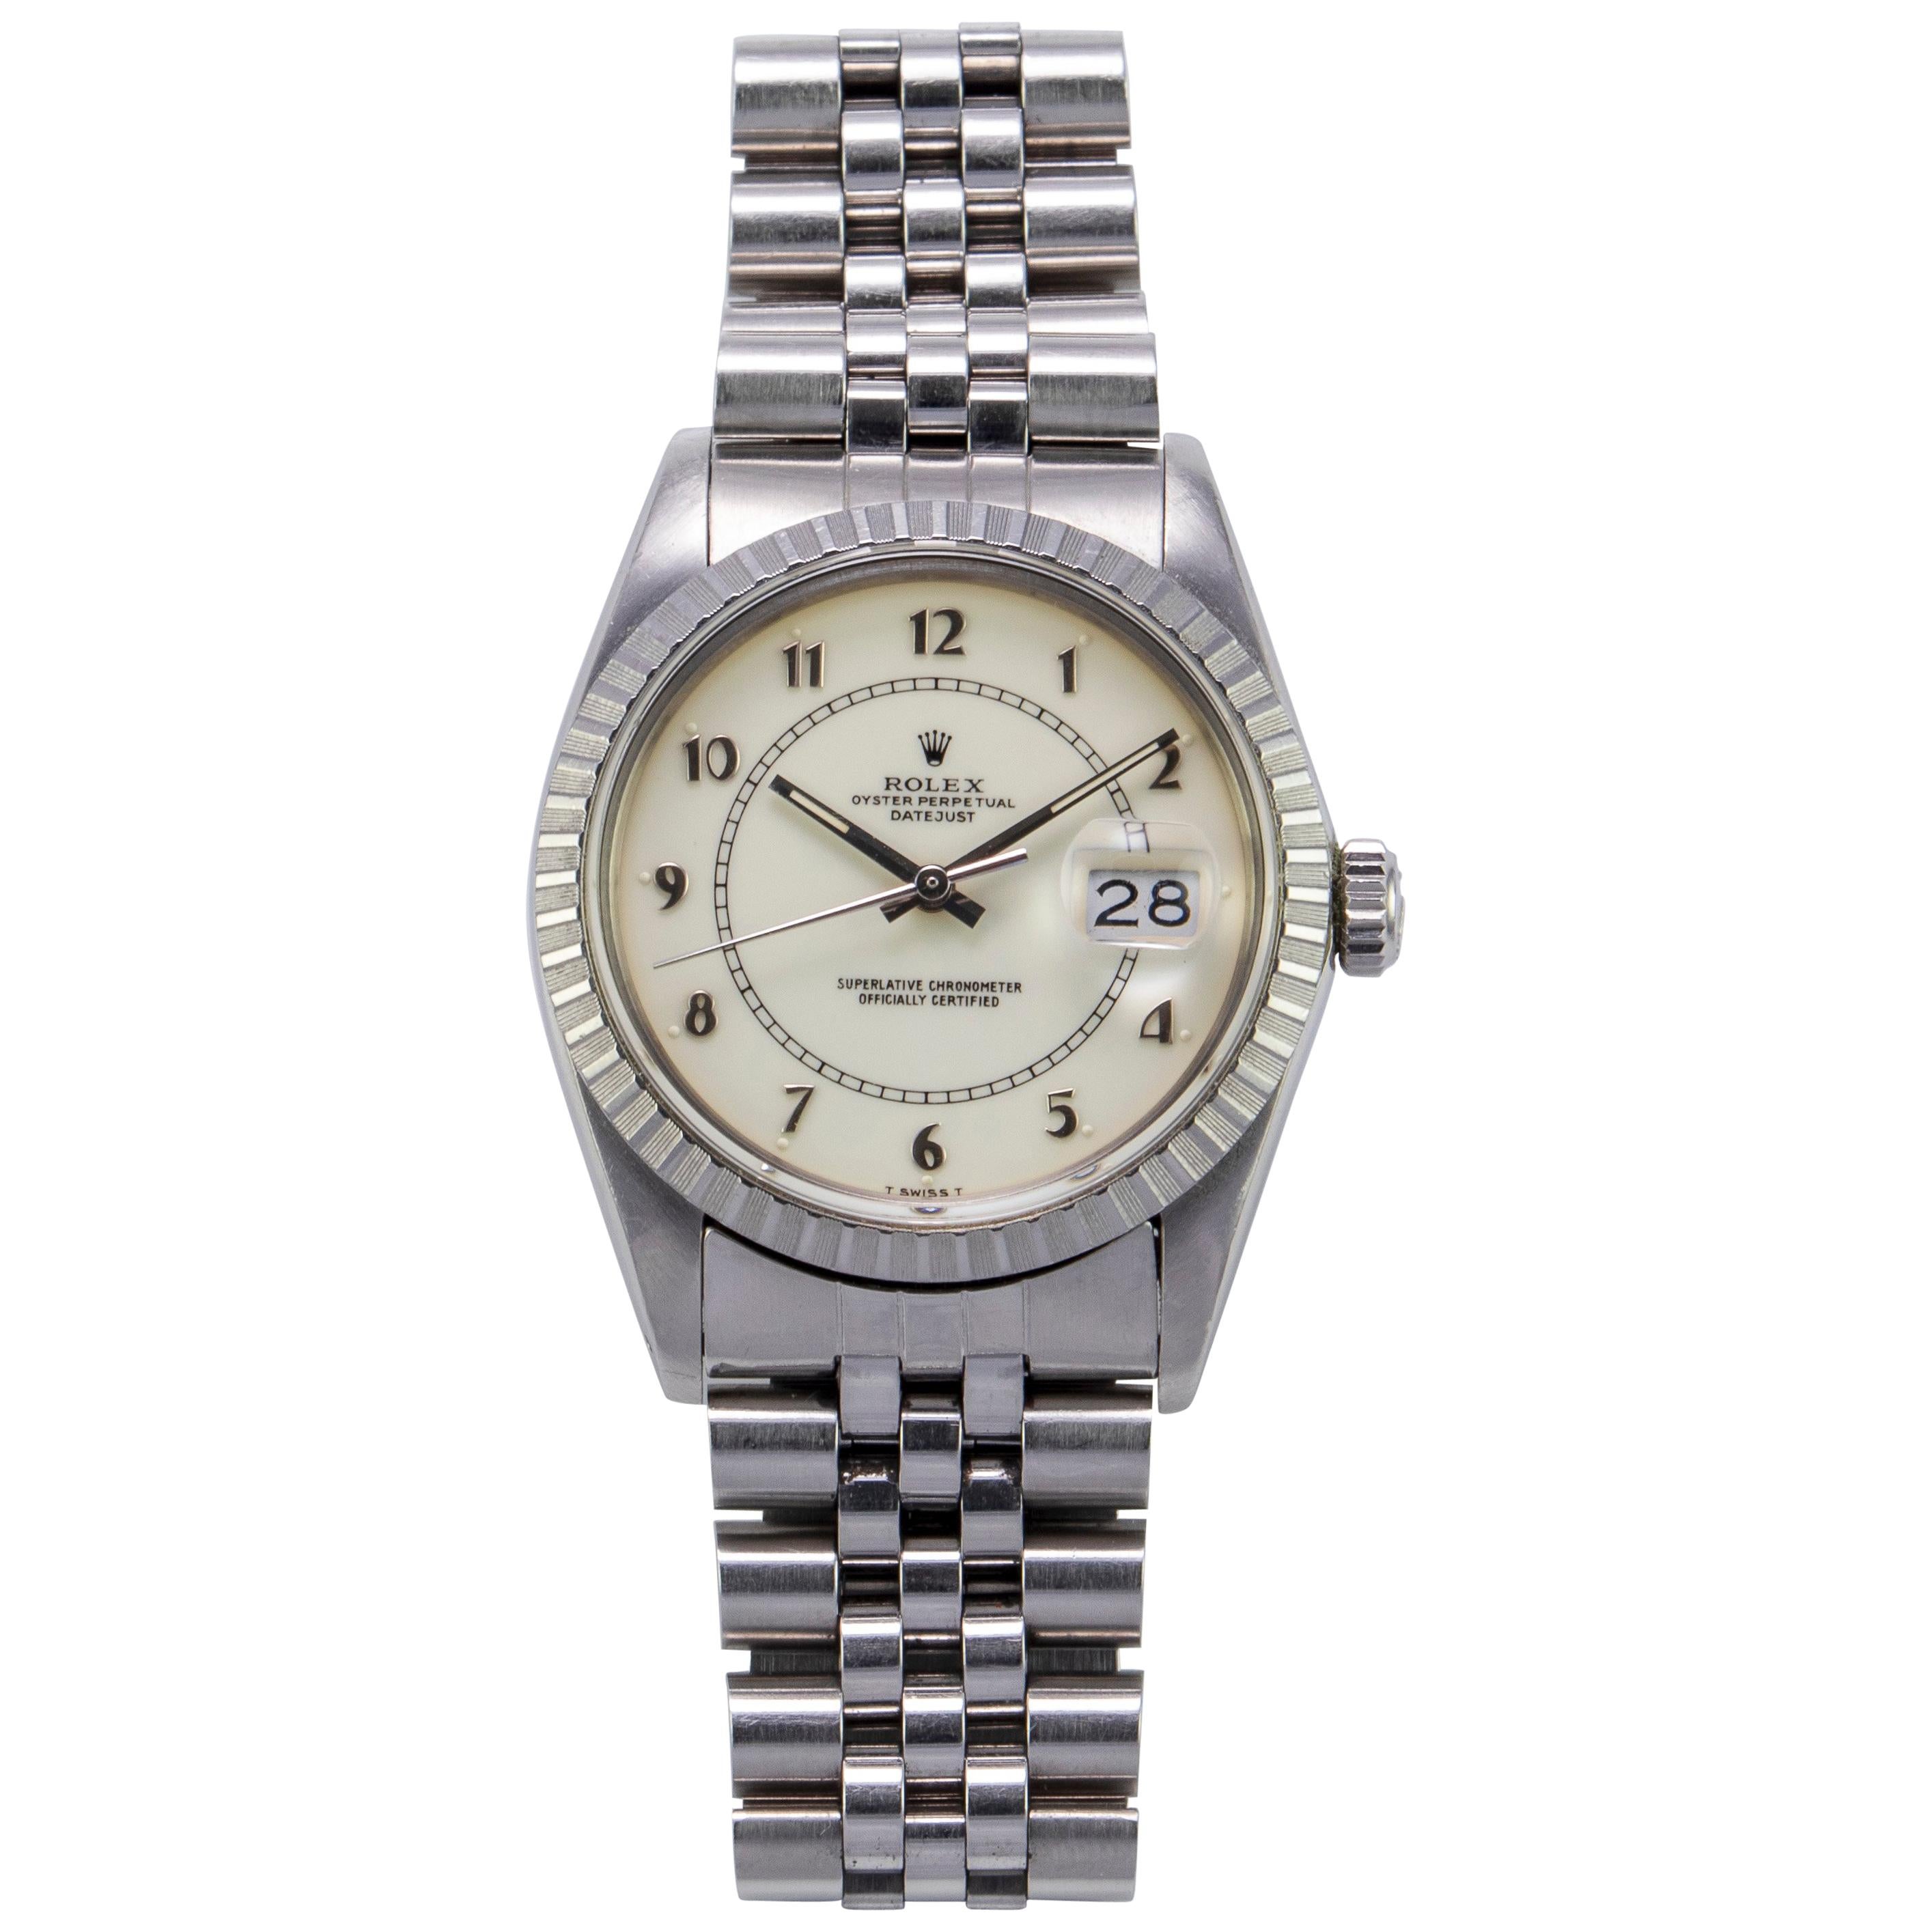 Rolex Steel and White Gold Boiler Gauge Datejust Watch with Papers, 1980s For Sale